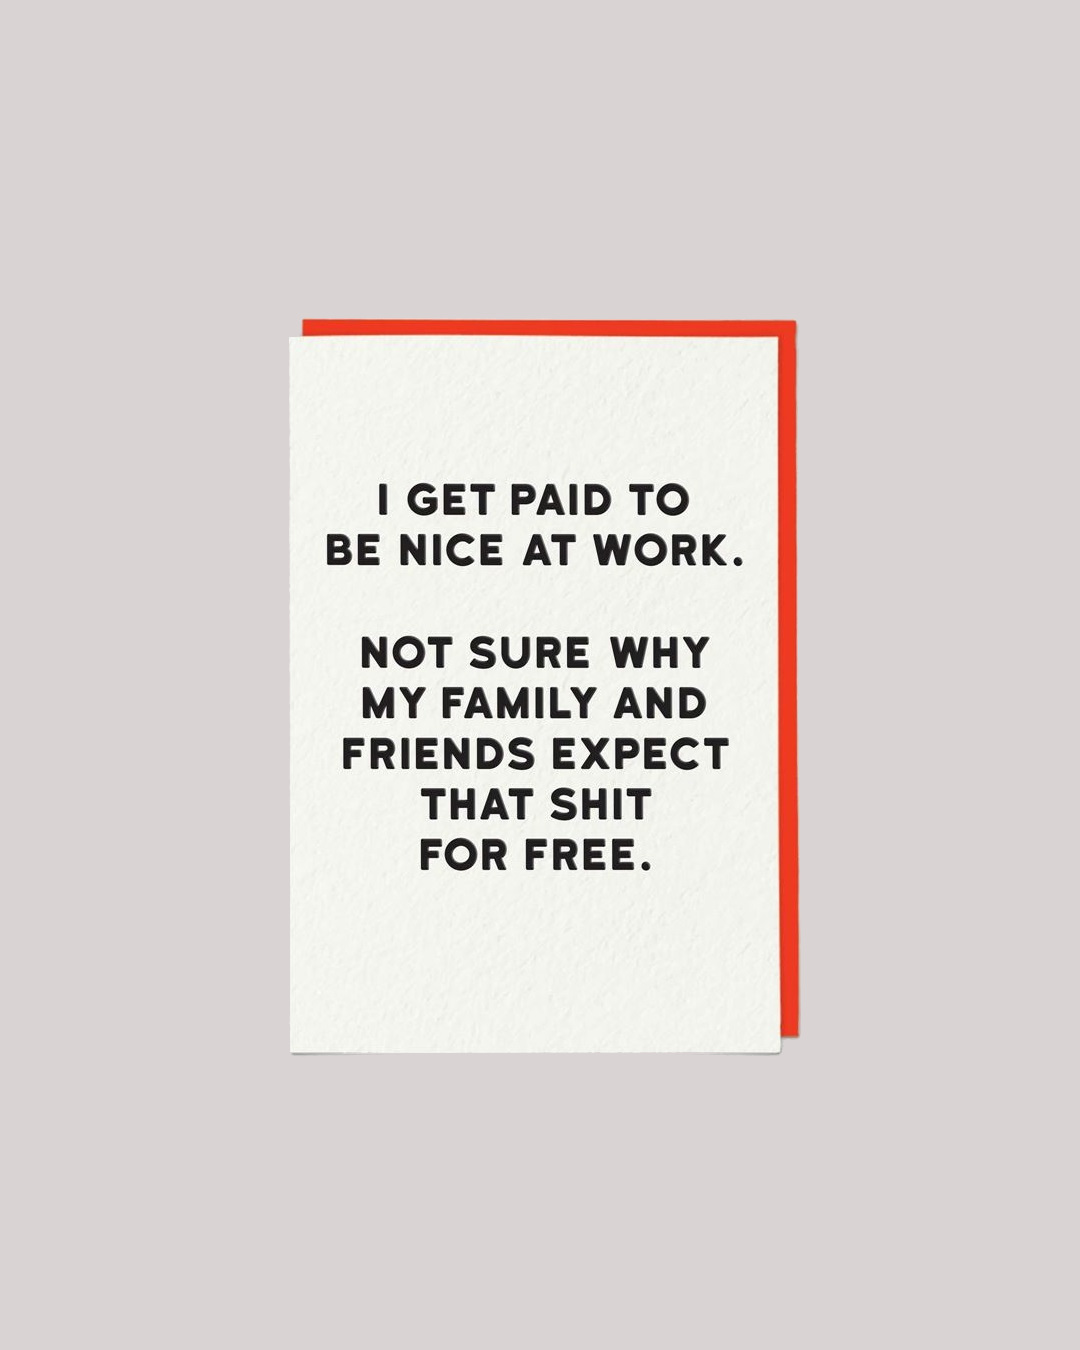 Paid at work humour card with orange envelope